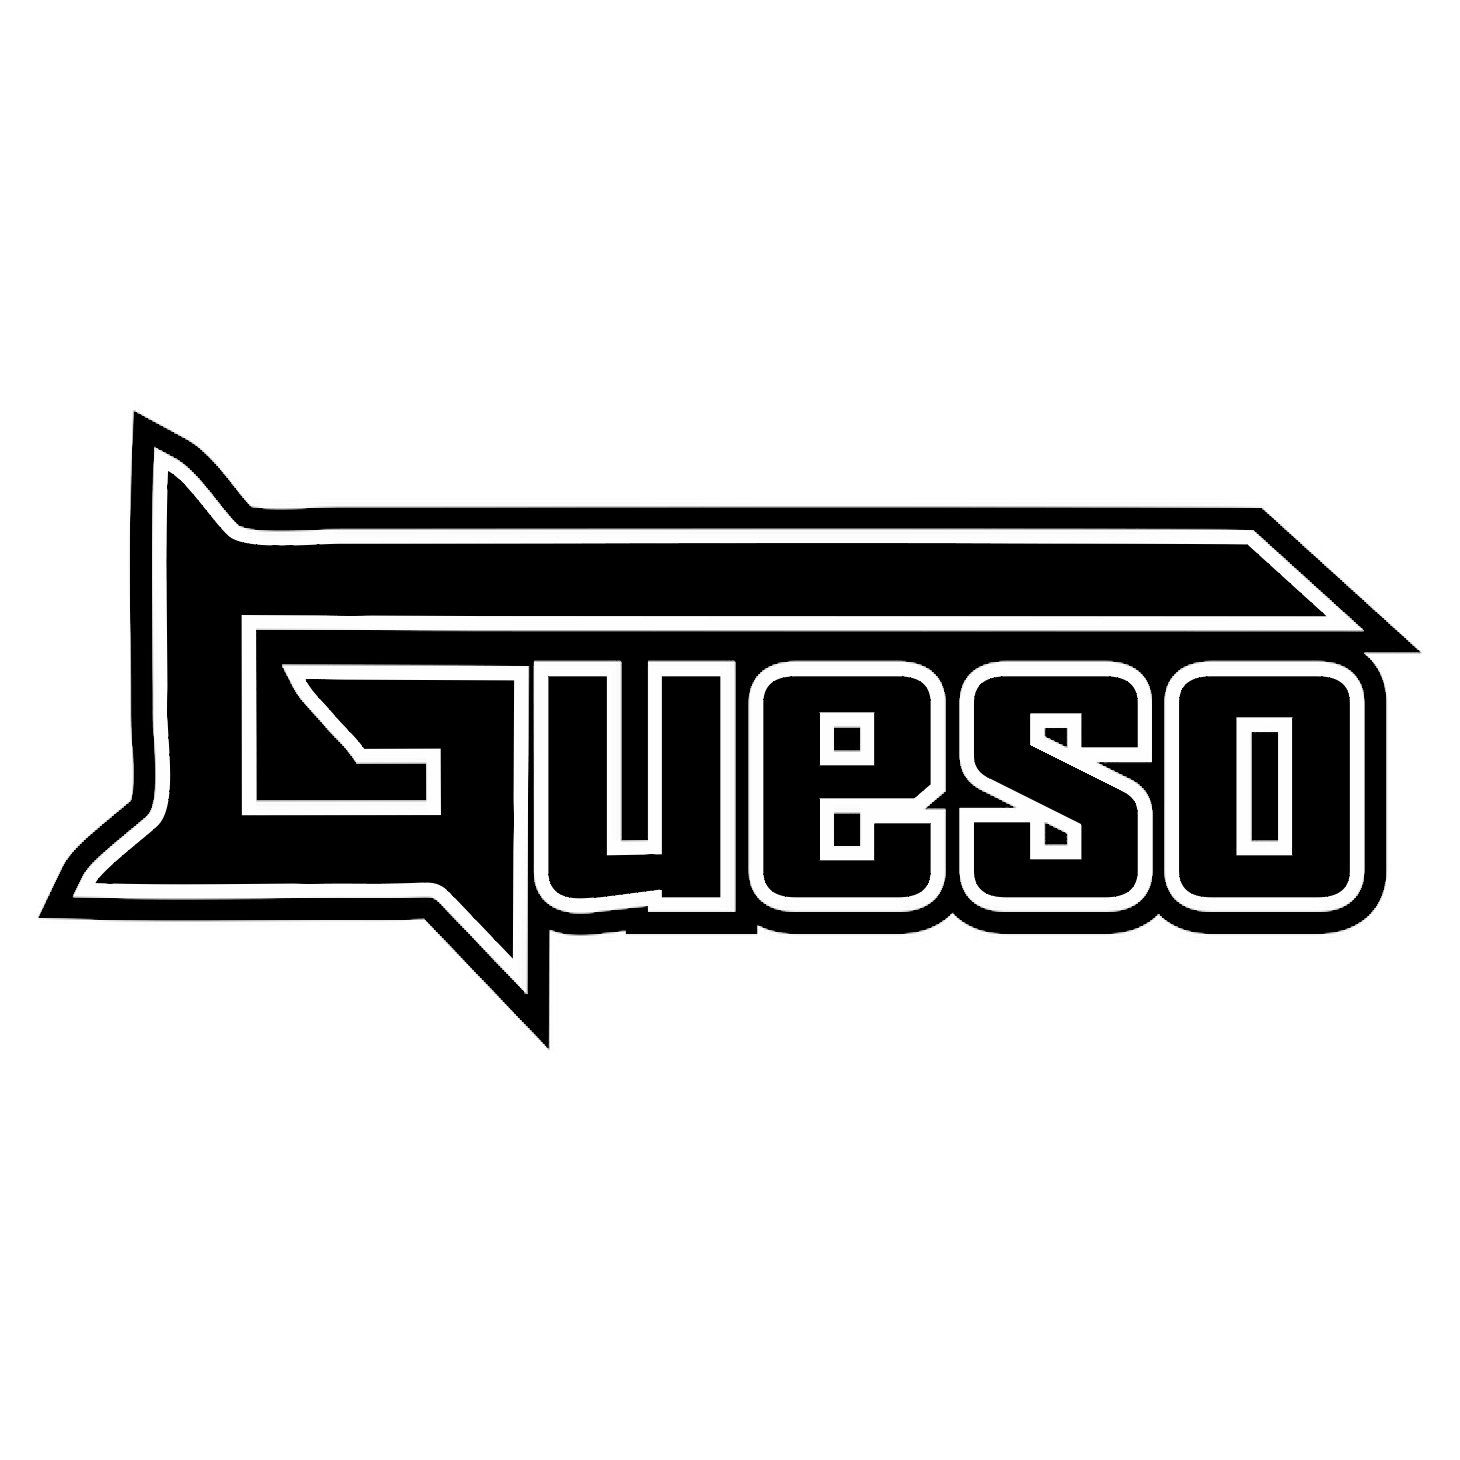  GUESO